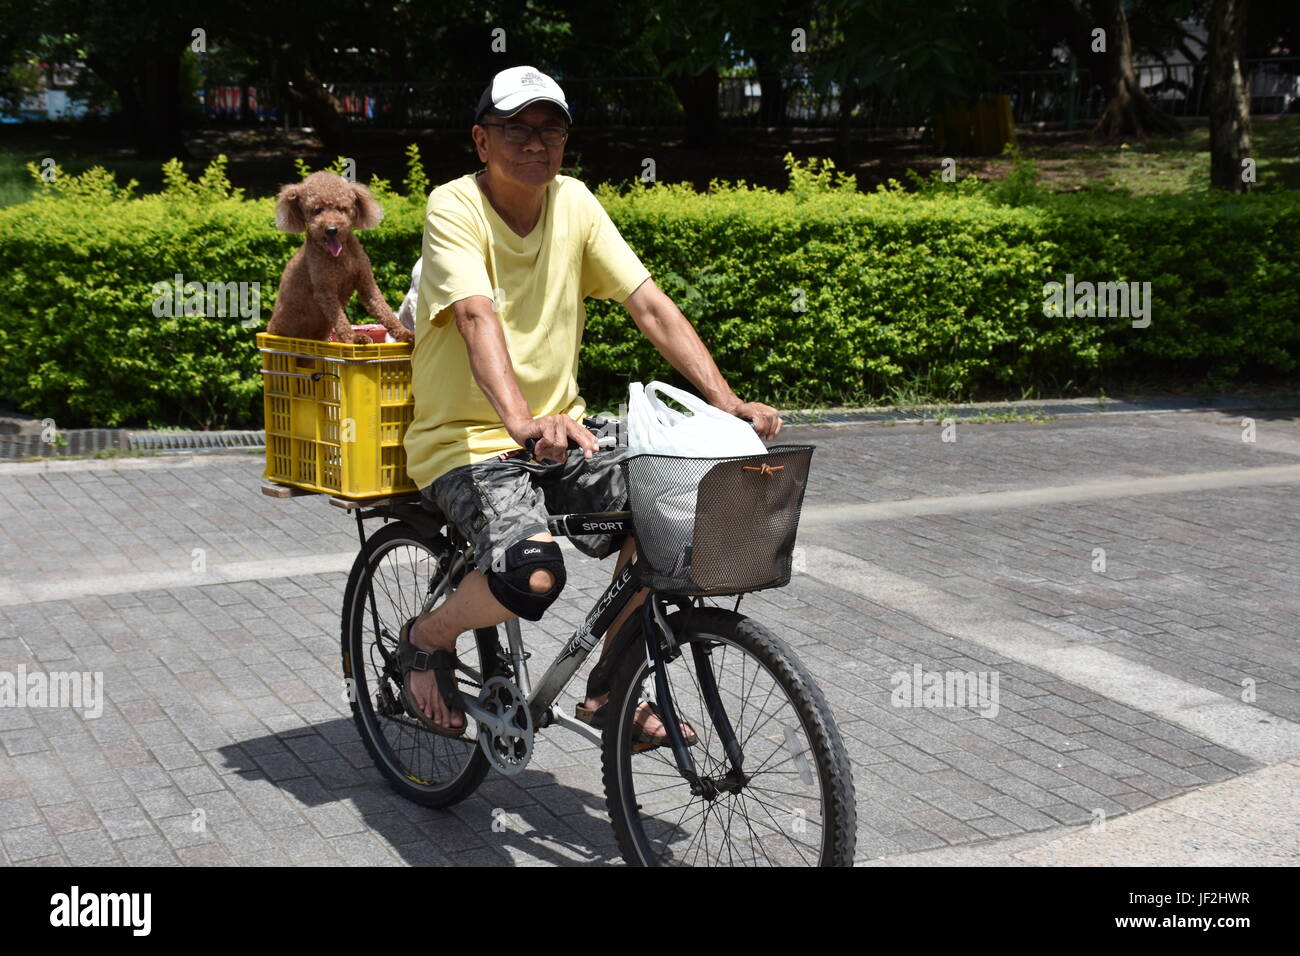 Old man on bicycle with dog in back basket went for a ride in the hot 94F weather in the park today. New Taipei City, Taiwan. Stock Photo